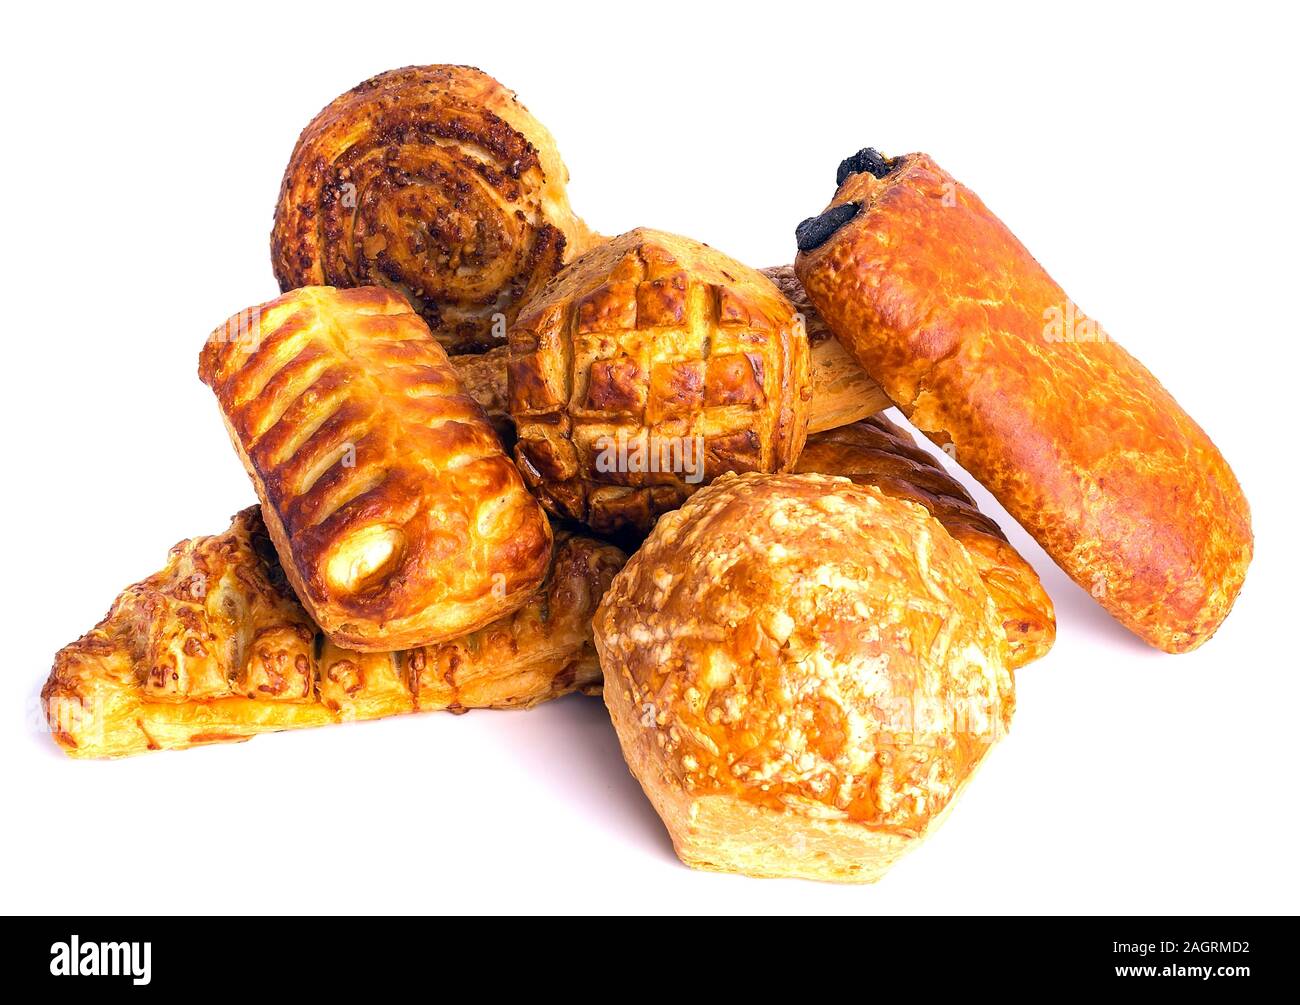 A variety of baked buns captivates with attractiveness, aroma and taste. Stock Photo